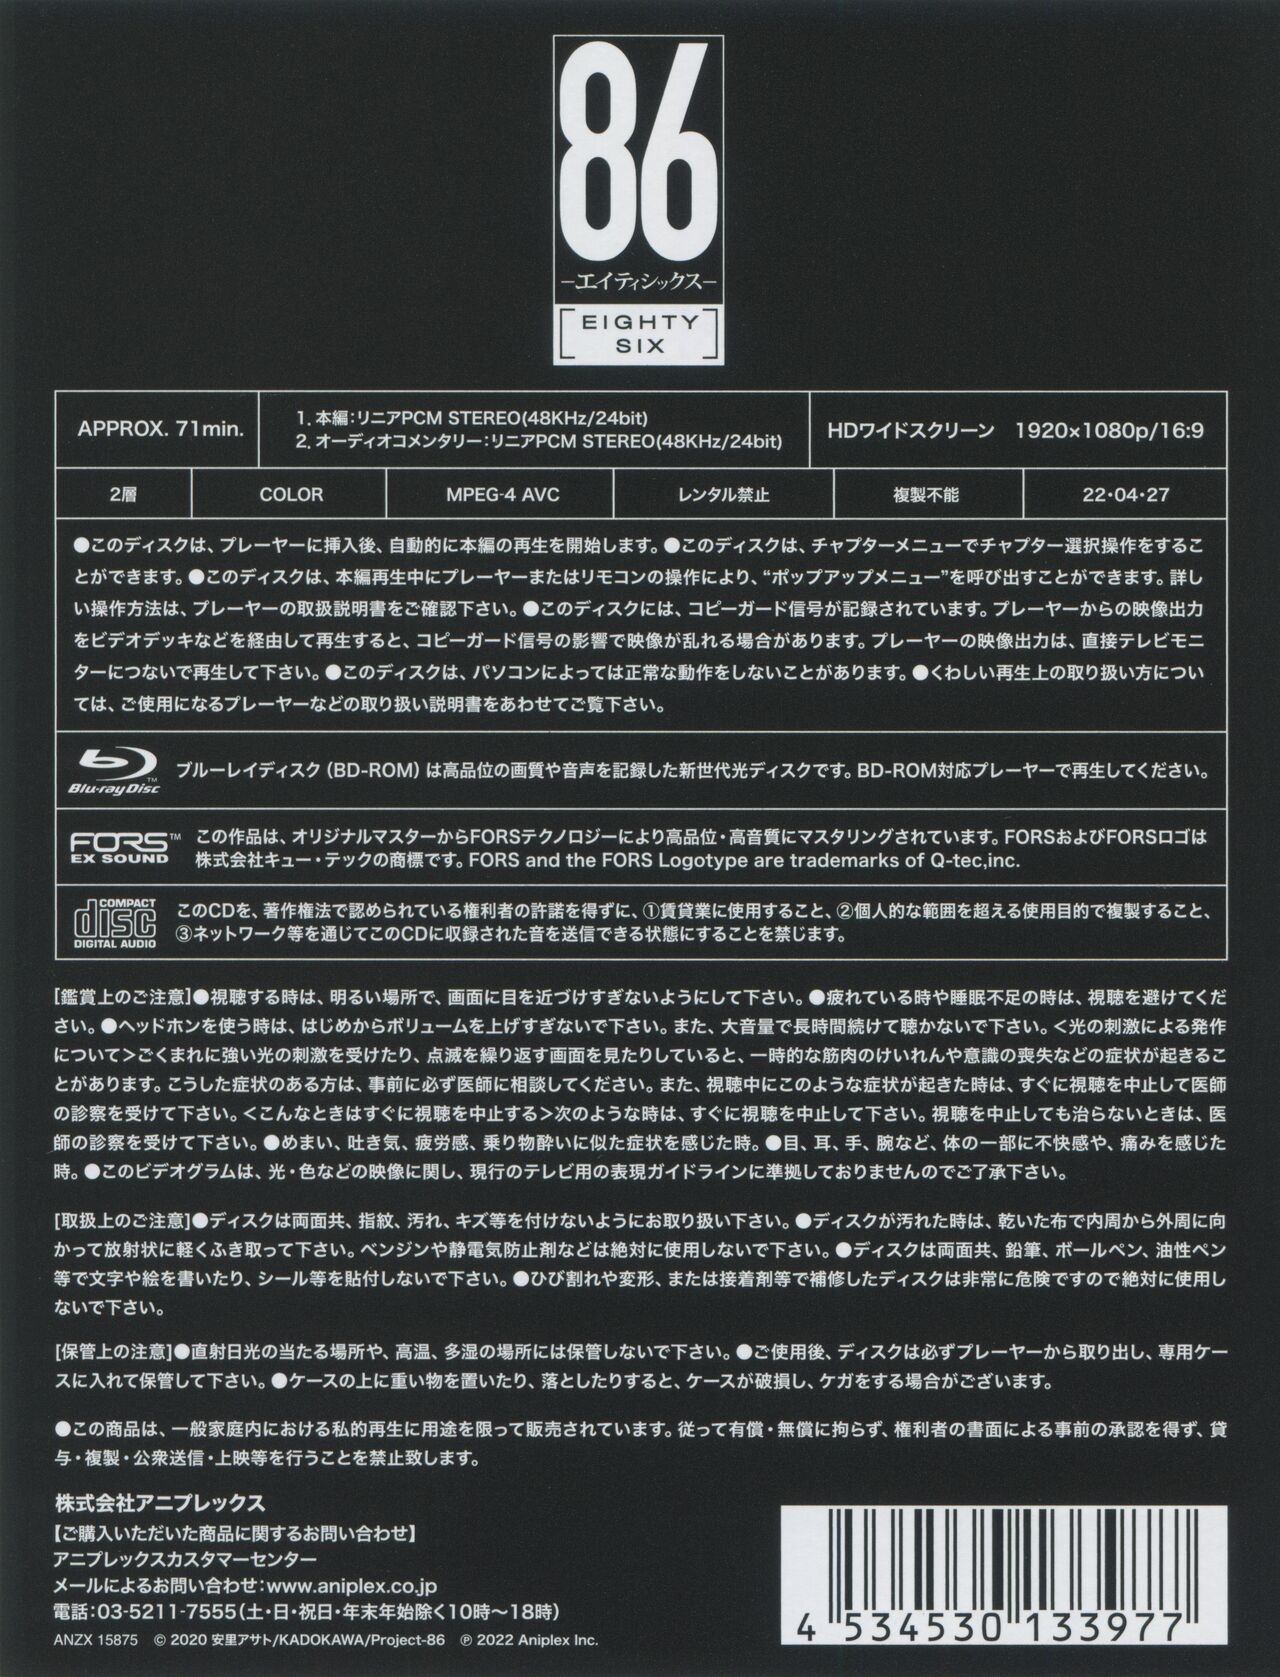 86 Eighty Six BD Scans + Booklet 277